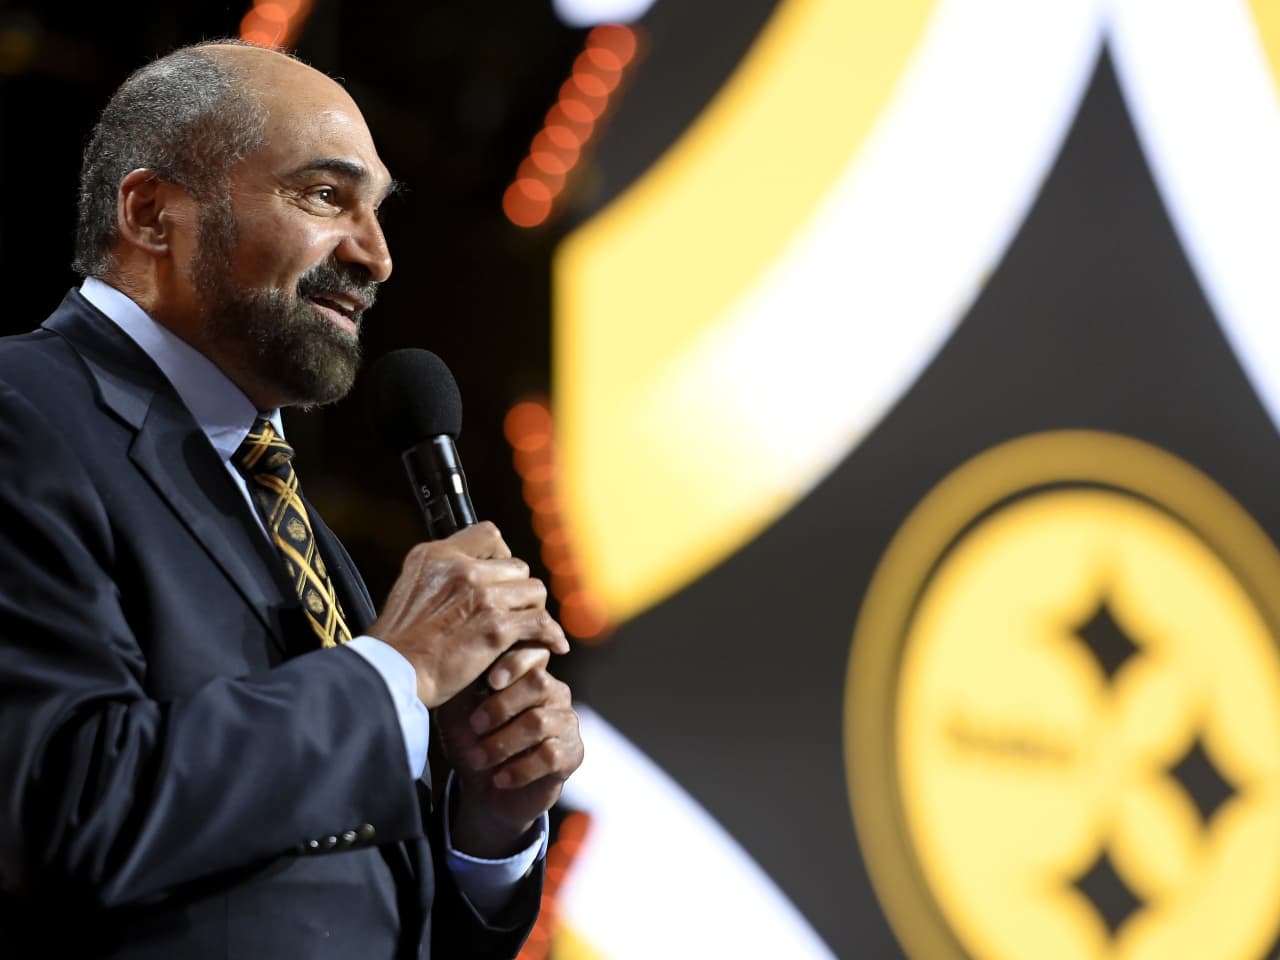 Meet Franco Harris' Wife And Son: Hall Of Fame RB Dies At 72